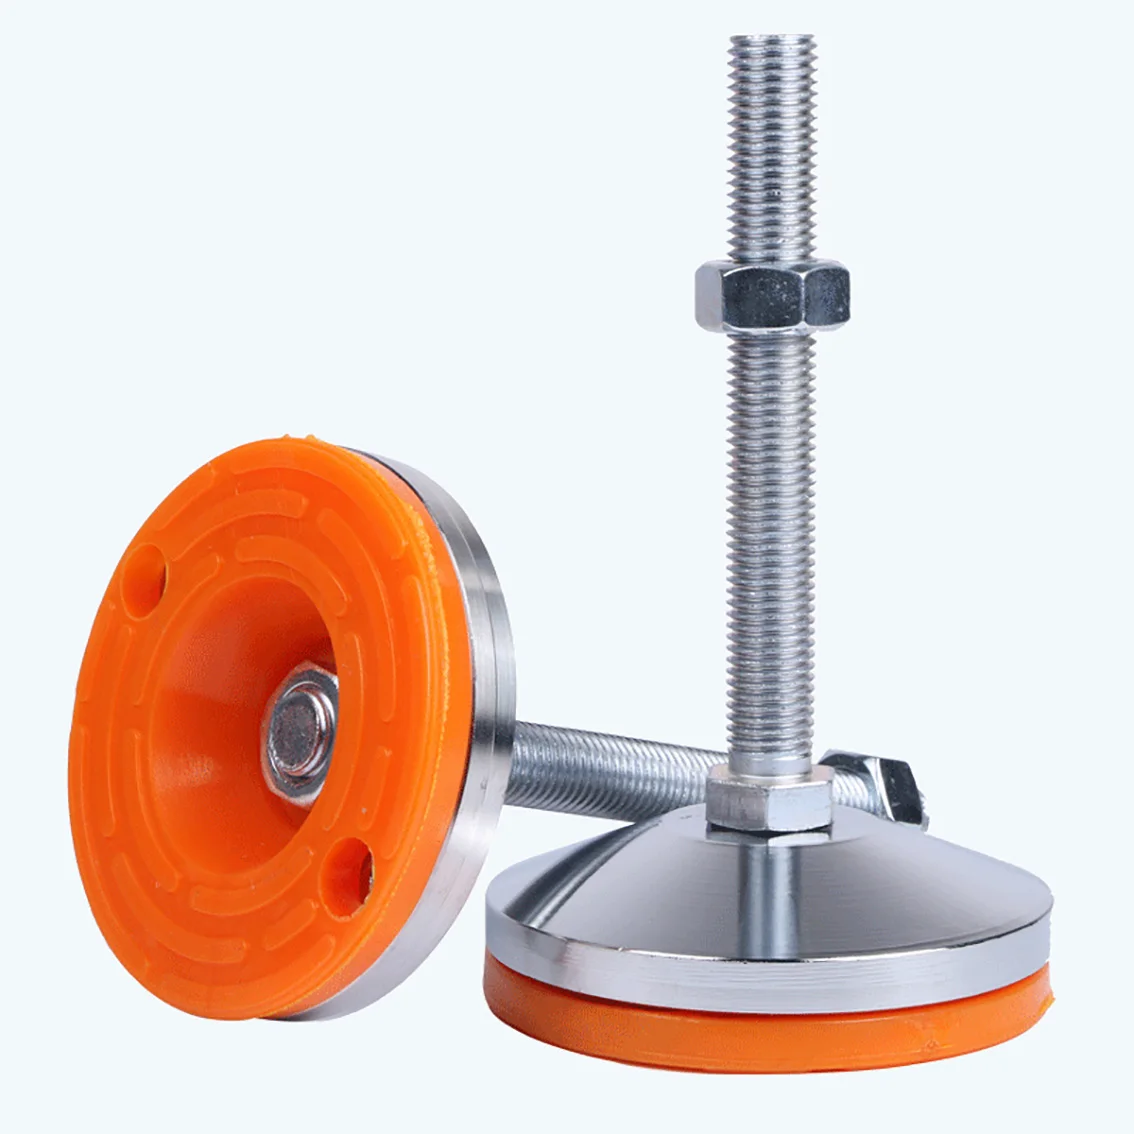 

1Pcs Heavy-Duty Adjustment Foot Cup M20-M30 Non-Skid Pad Metal Chassis Thread Length Articulated Leveling Foot